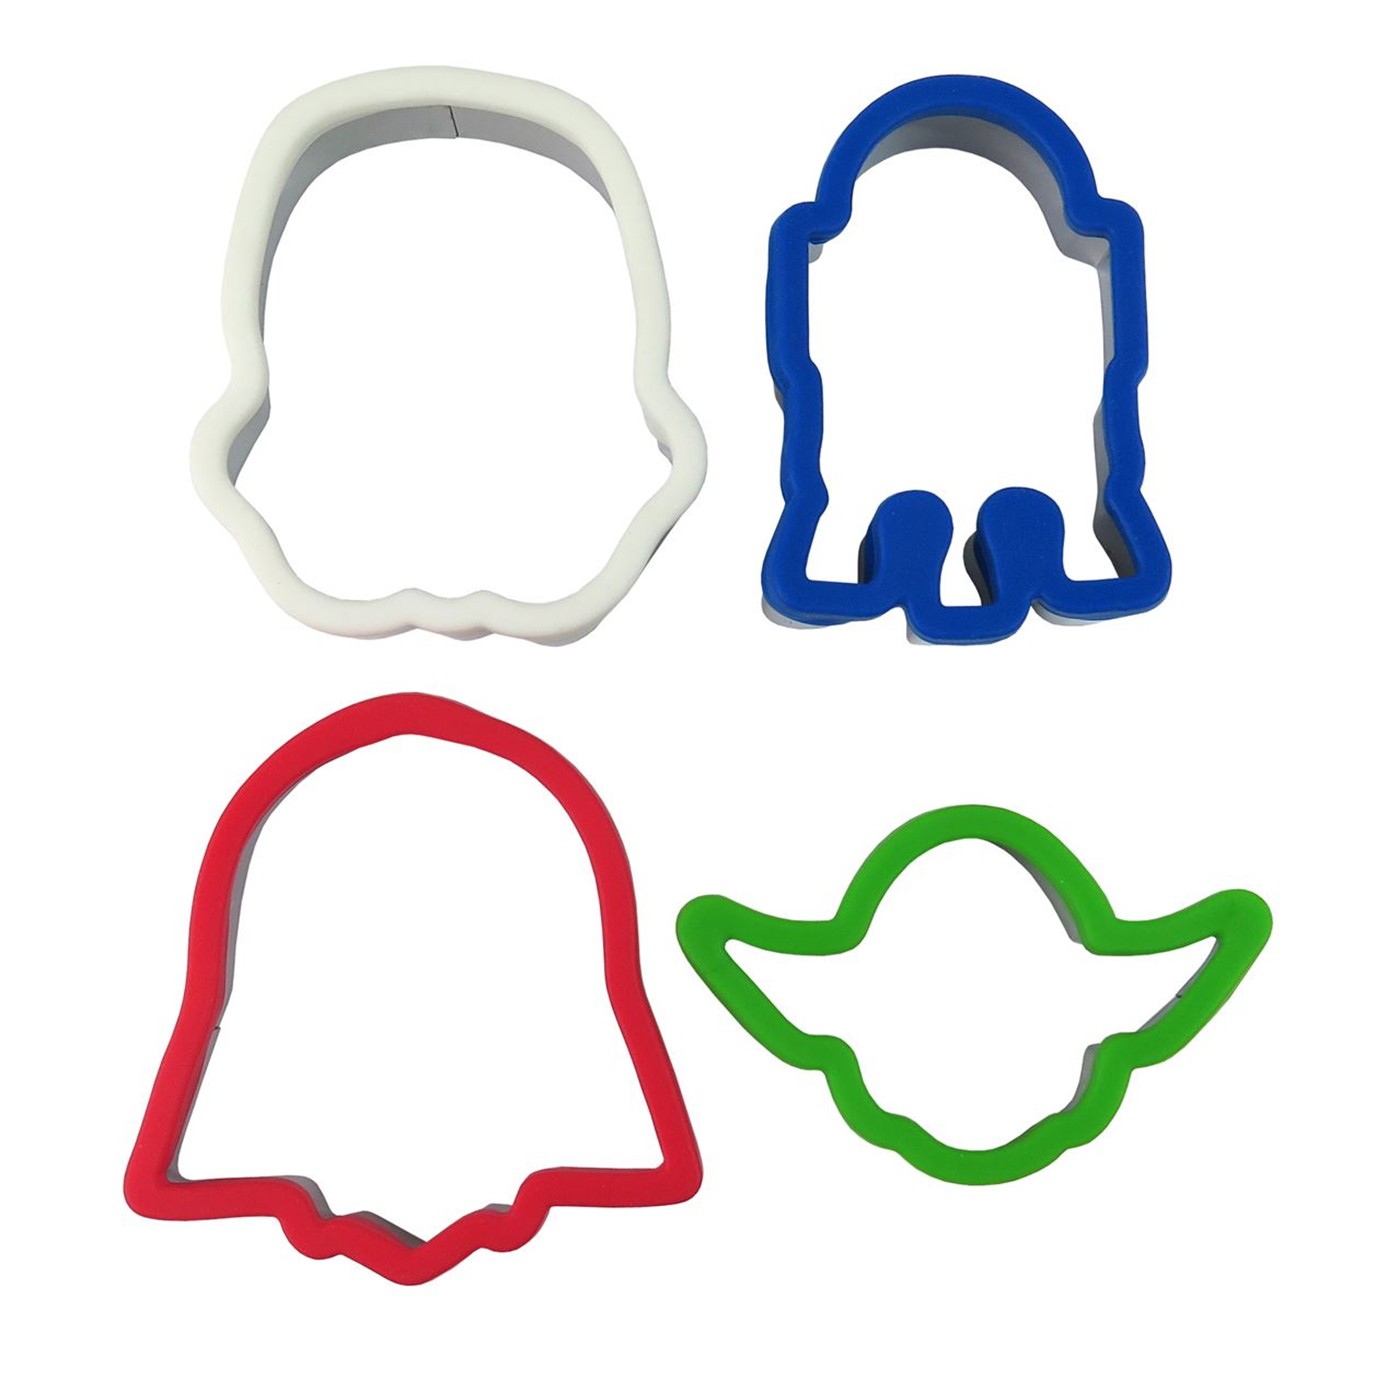 Star Wars Characters Cookie Cutters